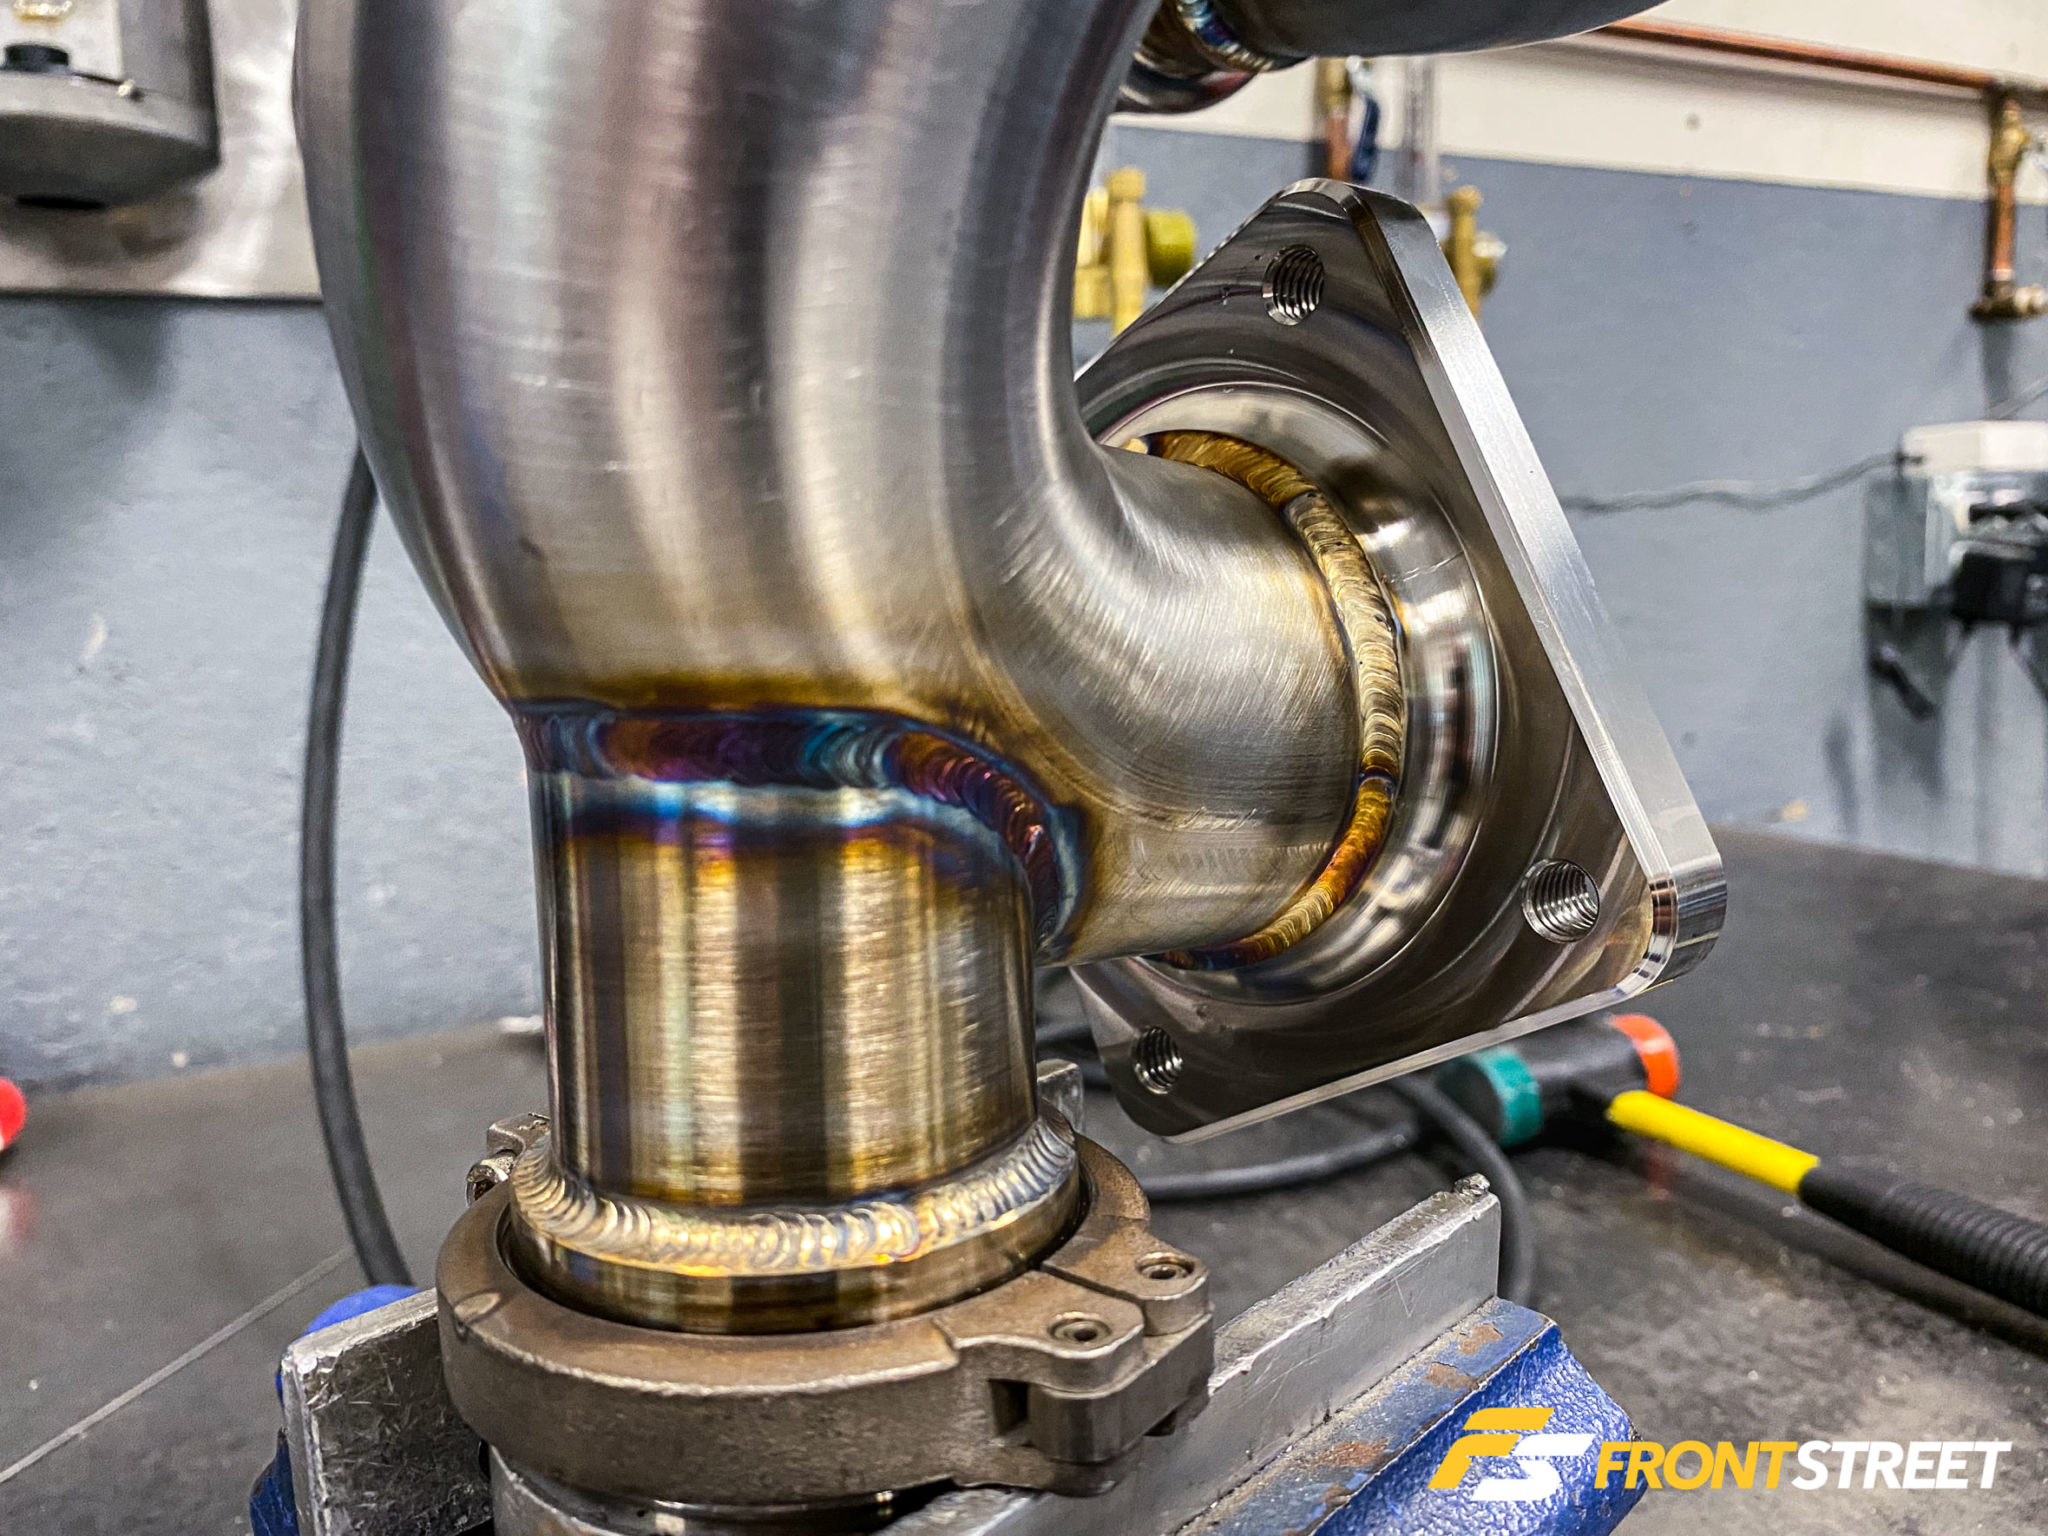 Talking Wastegate Technology With Turbosmart’s Marty Staggs